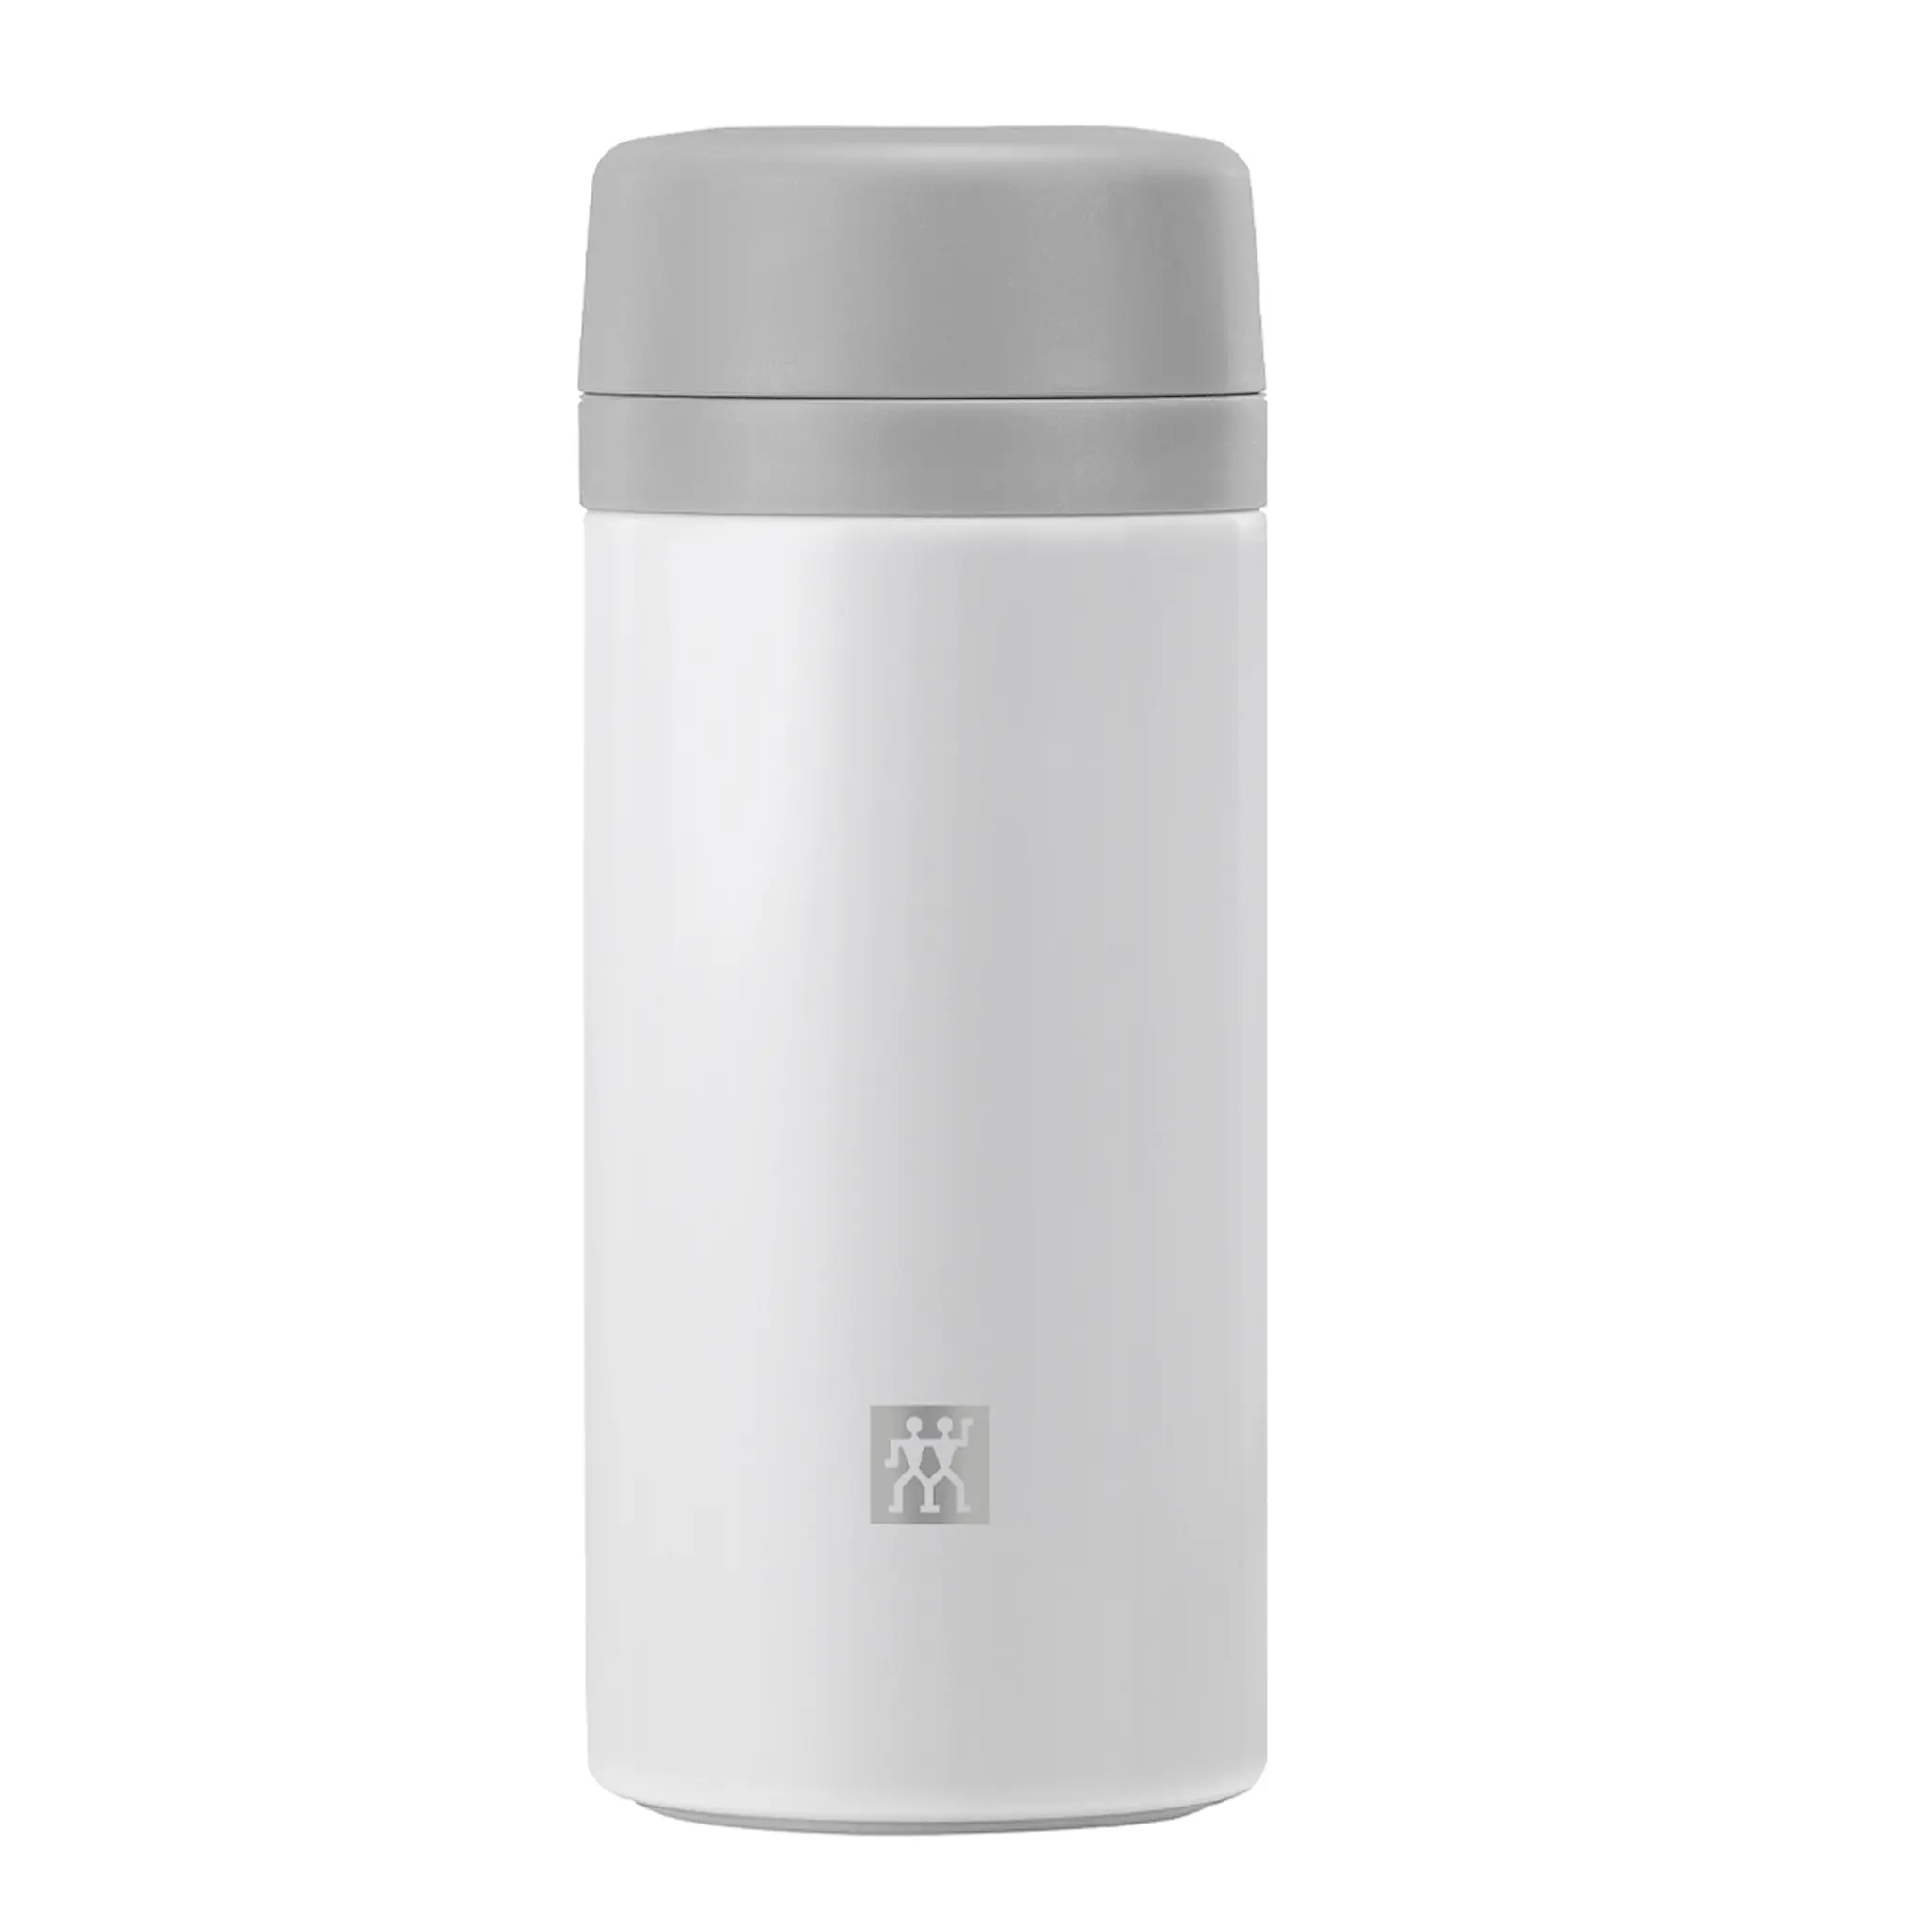 Zwilling Thermo Termosmugg med Sil 42 cl Silver/Vit